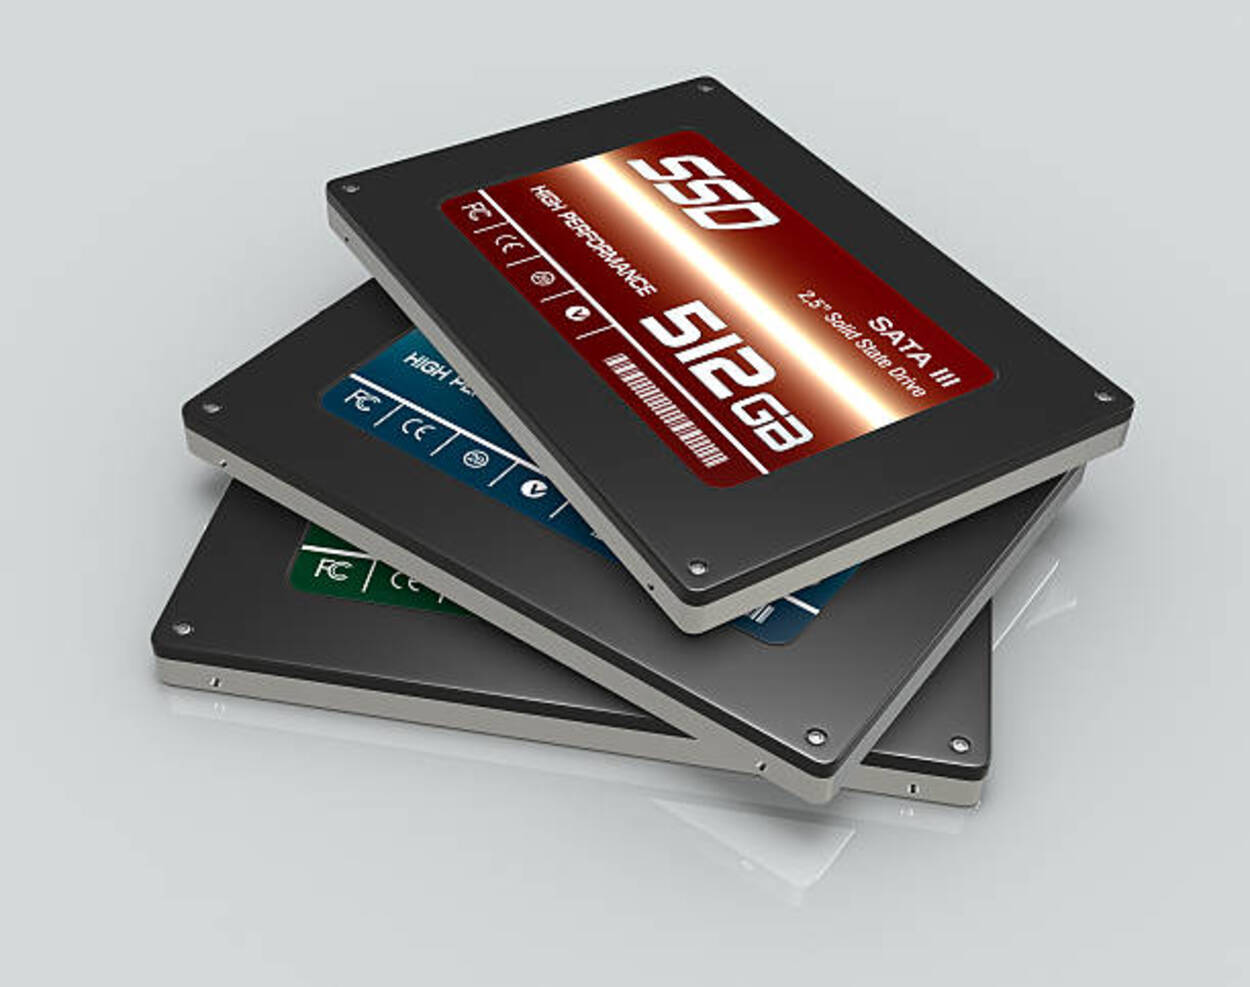 What Is The Difference Between 256GB SSD And 512GB SSD